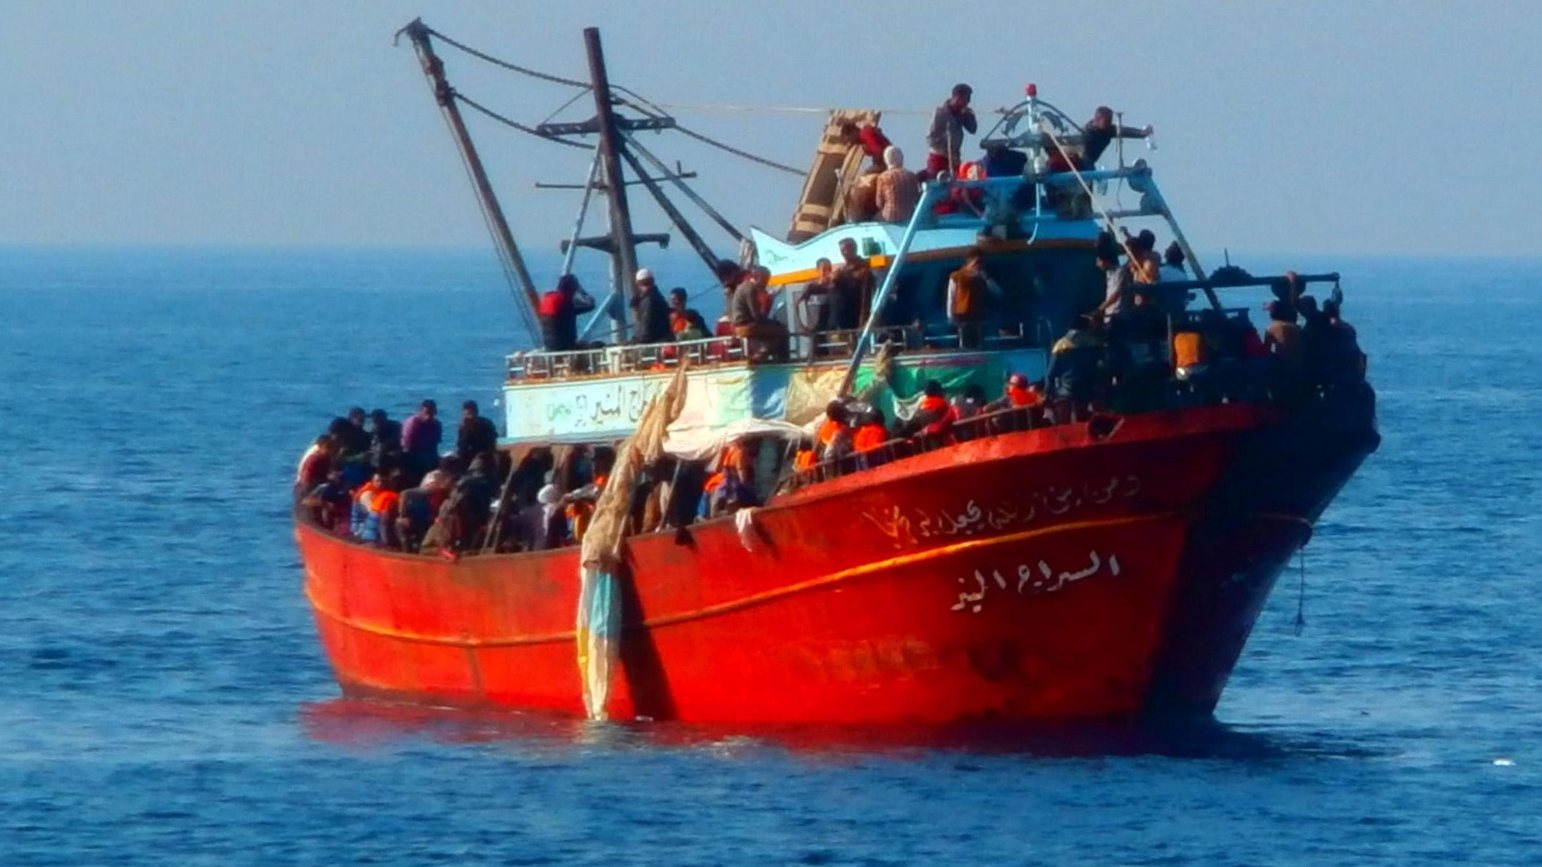 epa04255734 A handout picture released by the Italian Coast Guard shows a boat carrying 281 refugees, at sea off the coast of Calabria Region, Italy, 14 June 2014.  Nearly 300 migrants who said they were refugees from Syria have been rescued off the Italian coast, officials. The coast guard said two patrol boats and a a tax police vessel picked up 281 people from a 20-metre fishing boat some 150 kilometres away from the coast of Calabria, the region that forms the tip of Italy&#039;s boot. The migrants were spotted in the Mediterranean between Greece and Italy. Among the rescued passengers were 93 children and six women, some of who were in a precarious medical condition, the coast guard said.  EPA/ITALIAN COASTGUARD / HANDOUT  HANDOUT EDITORIAL USE ONLY/NO SALES/NO ARCHIVES